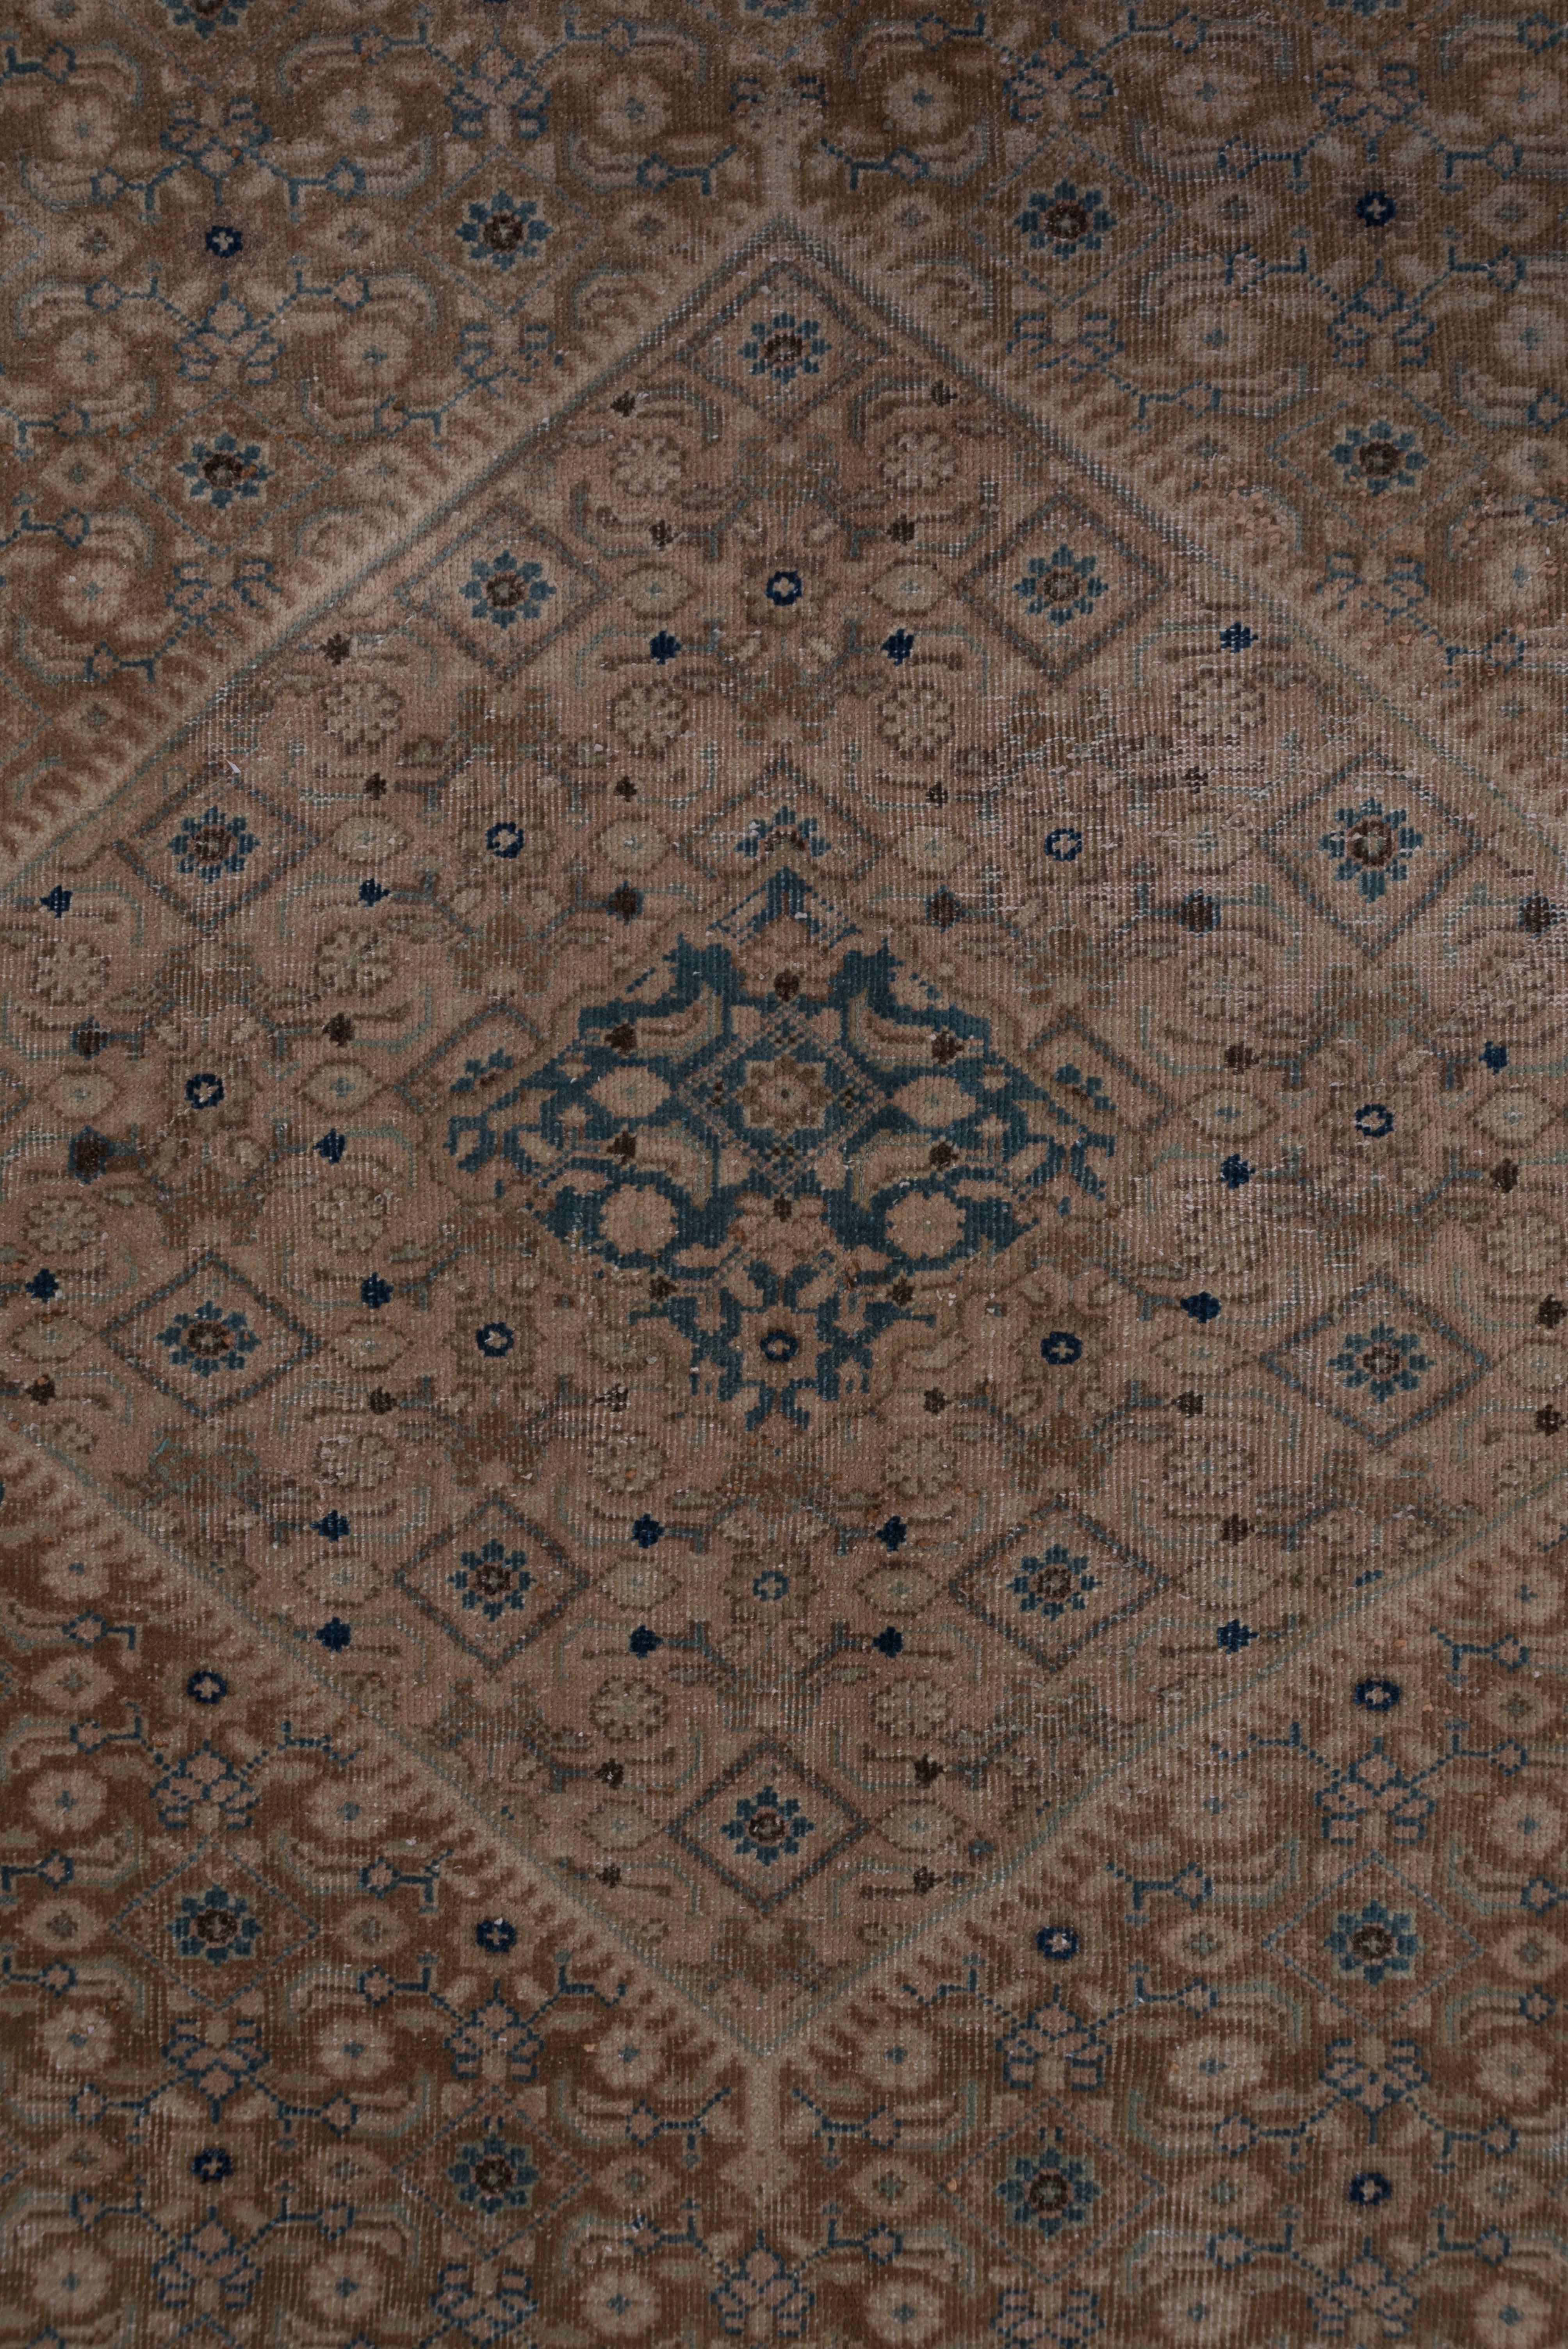 A small-scale Herati pattern covers the rust field and flows into the layered diamond medallion and triangular corners of this mellow toned west Persian village carpet. The light straw border shows a small rosette and bent leaf pattern matching the